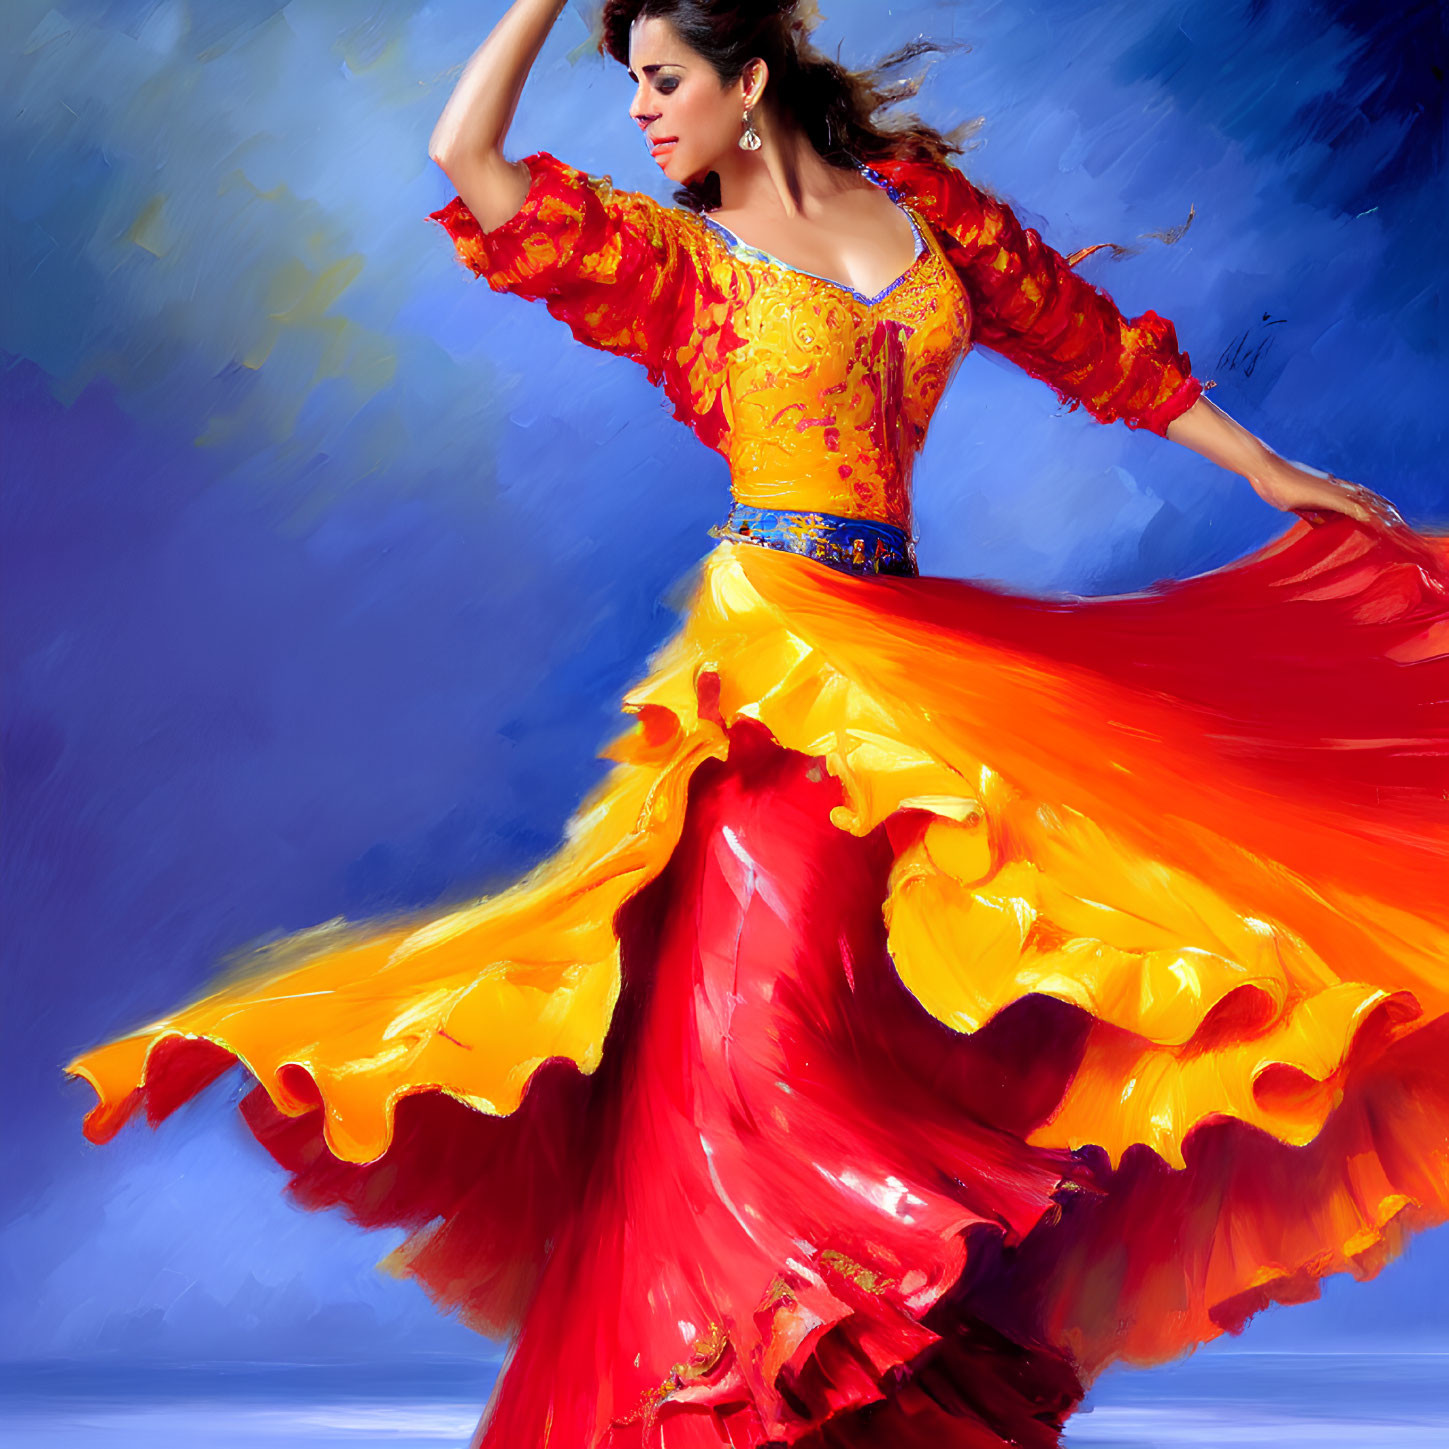 Colorful painting of woman dancing in red and yellow dress on blue background